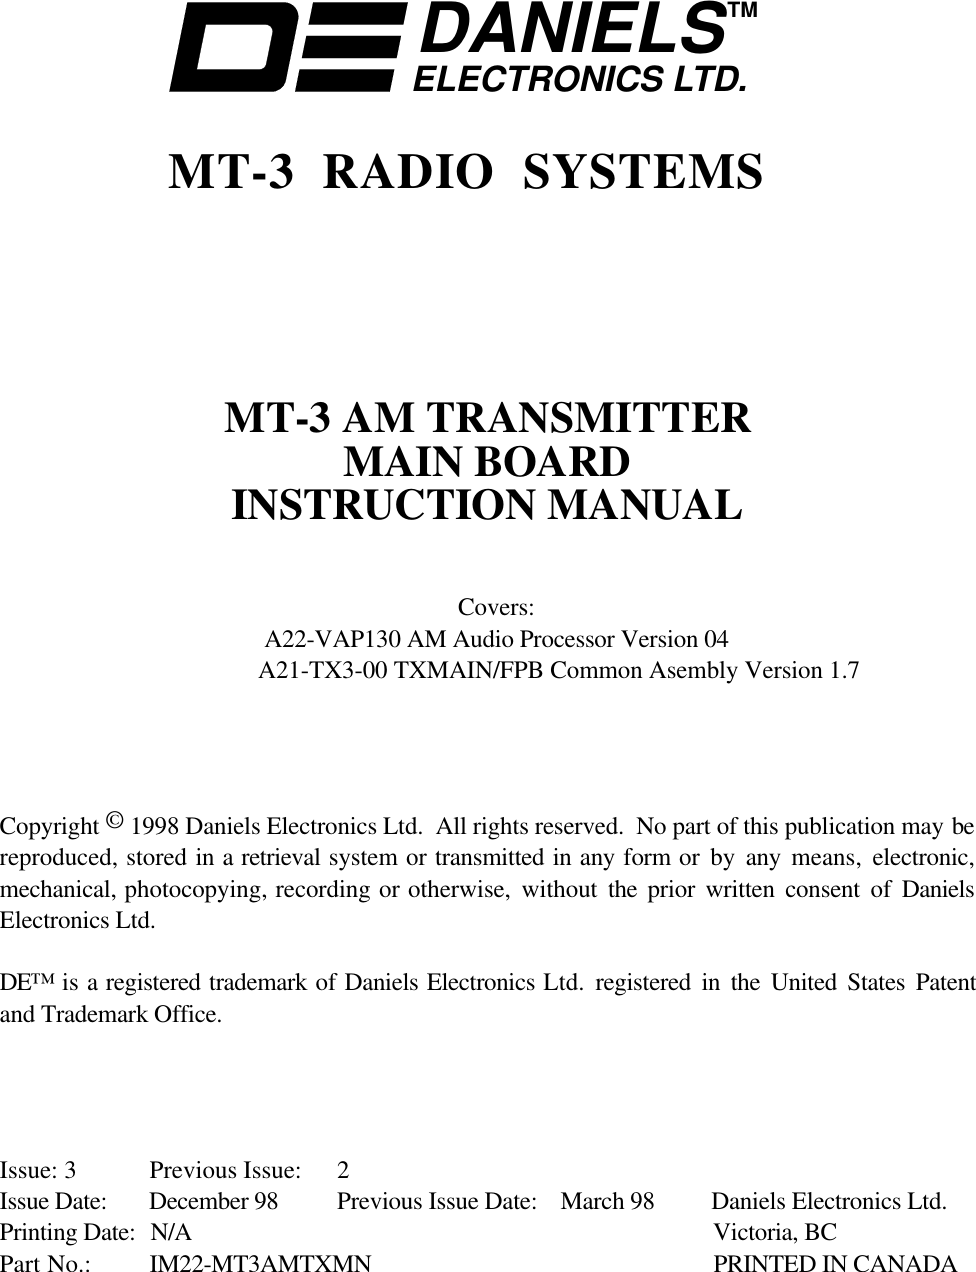 DANIELSELECTRONICS LTD.TMMT-3 RADIO SYSTEMSMT-3 AM TRANSMITTERMAIN BOARDINSTRUCTION MANUALCovers:A22-VAP130 AM Audio Processor Version 04                    A21-TX3-00 TXMAIN/FPB Common Asembly Version 1.7Copyright © 1998 Daniels Electronics Ltd.  All rights reserved.  No part of this publication may bereproduced, stored in a retrieval system or transmitted in any form or by any means,  electronic,mechanical, photocopying, recording or otherwise, without the  prior written consent of DanielsElectronics Ltd.DE™ is a registered trademark of Daniels Electronics Ltd.  registered in the United States Patentand Trademark Office.Issue: 3 Previous Issue: 2Issue Date: December 98 Previous Issue Date: March 98 Daniels Electronics Ltd.Printing Date: N/A Victoria, BCPart No.: IM22-MT3AMTXMN PRINTED IN CANADA